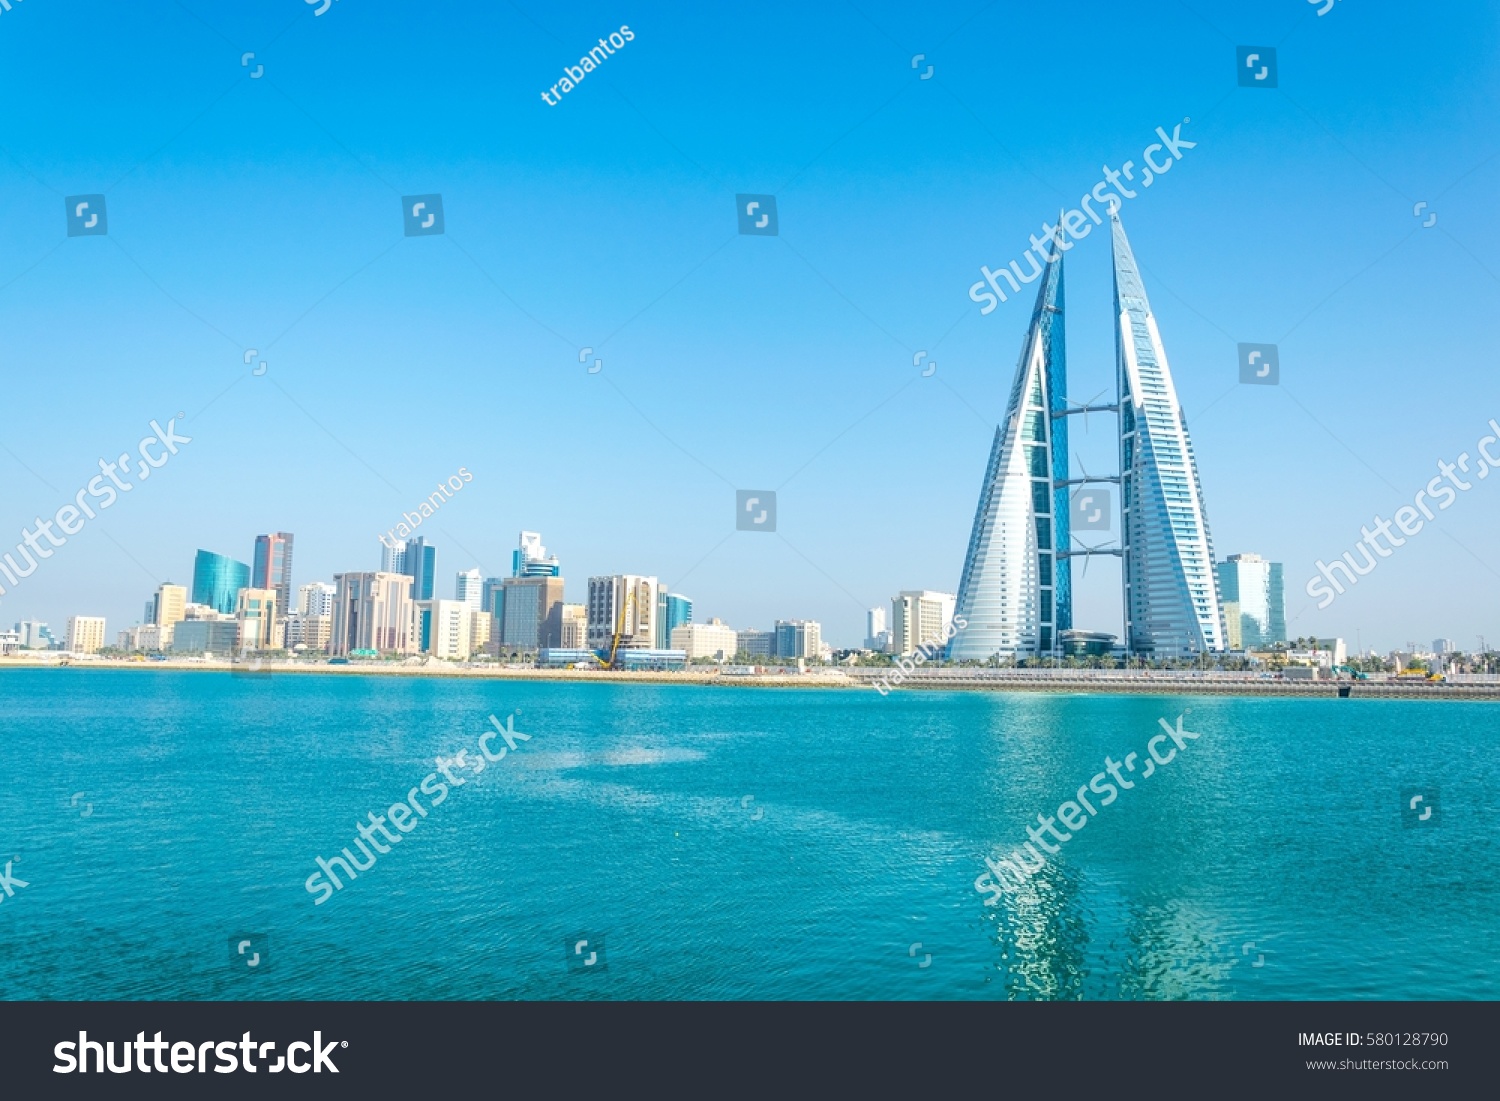 Skyline of Manama dominated by the World trade Center building, Bahrain. #580128790